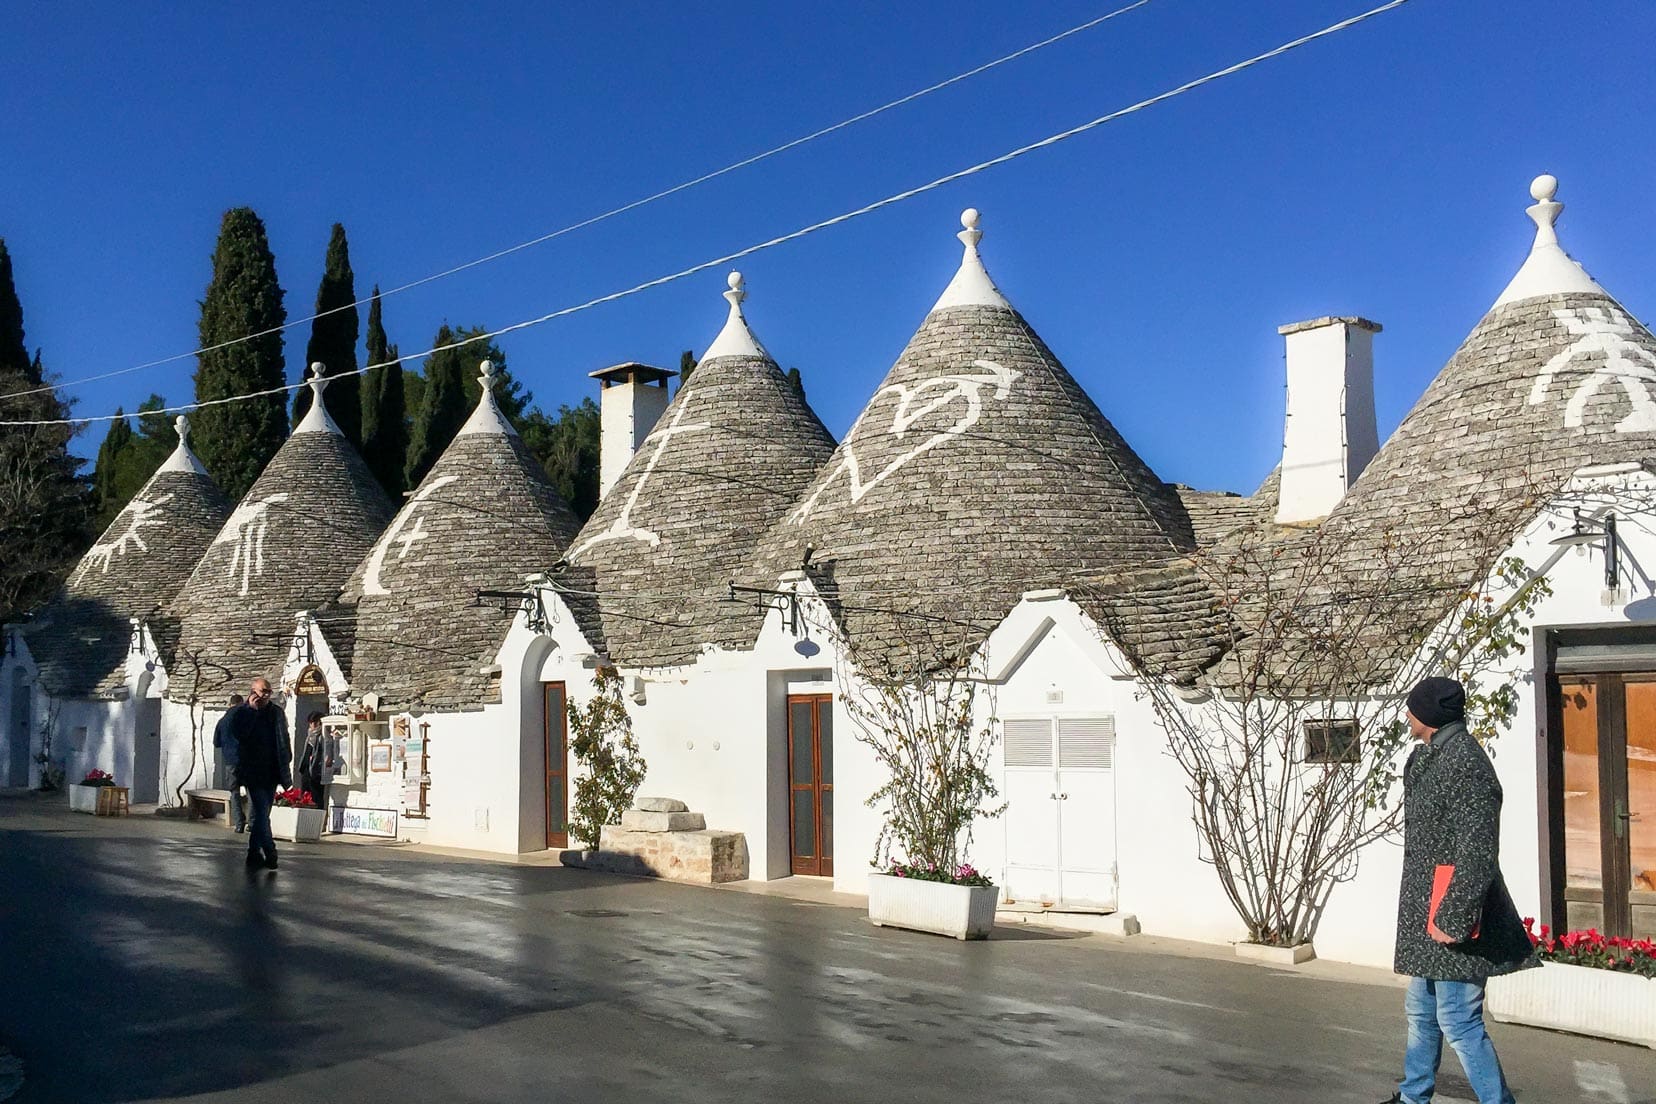 Row of Alberobello trulli with white painted symbols on the roof